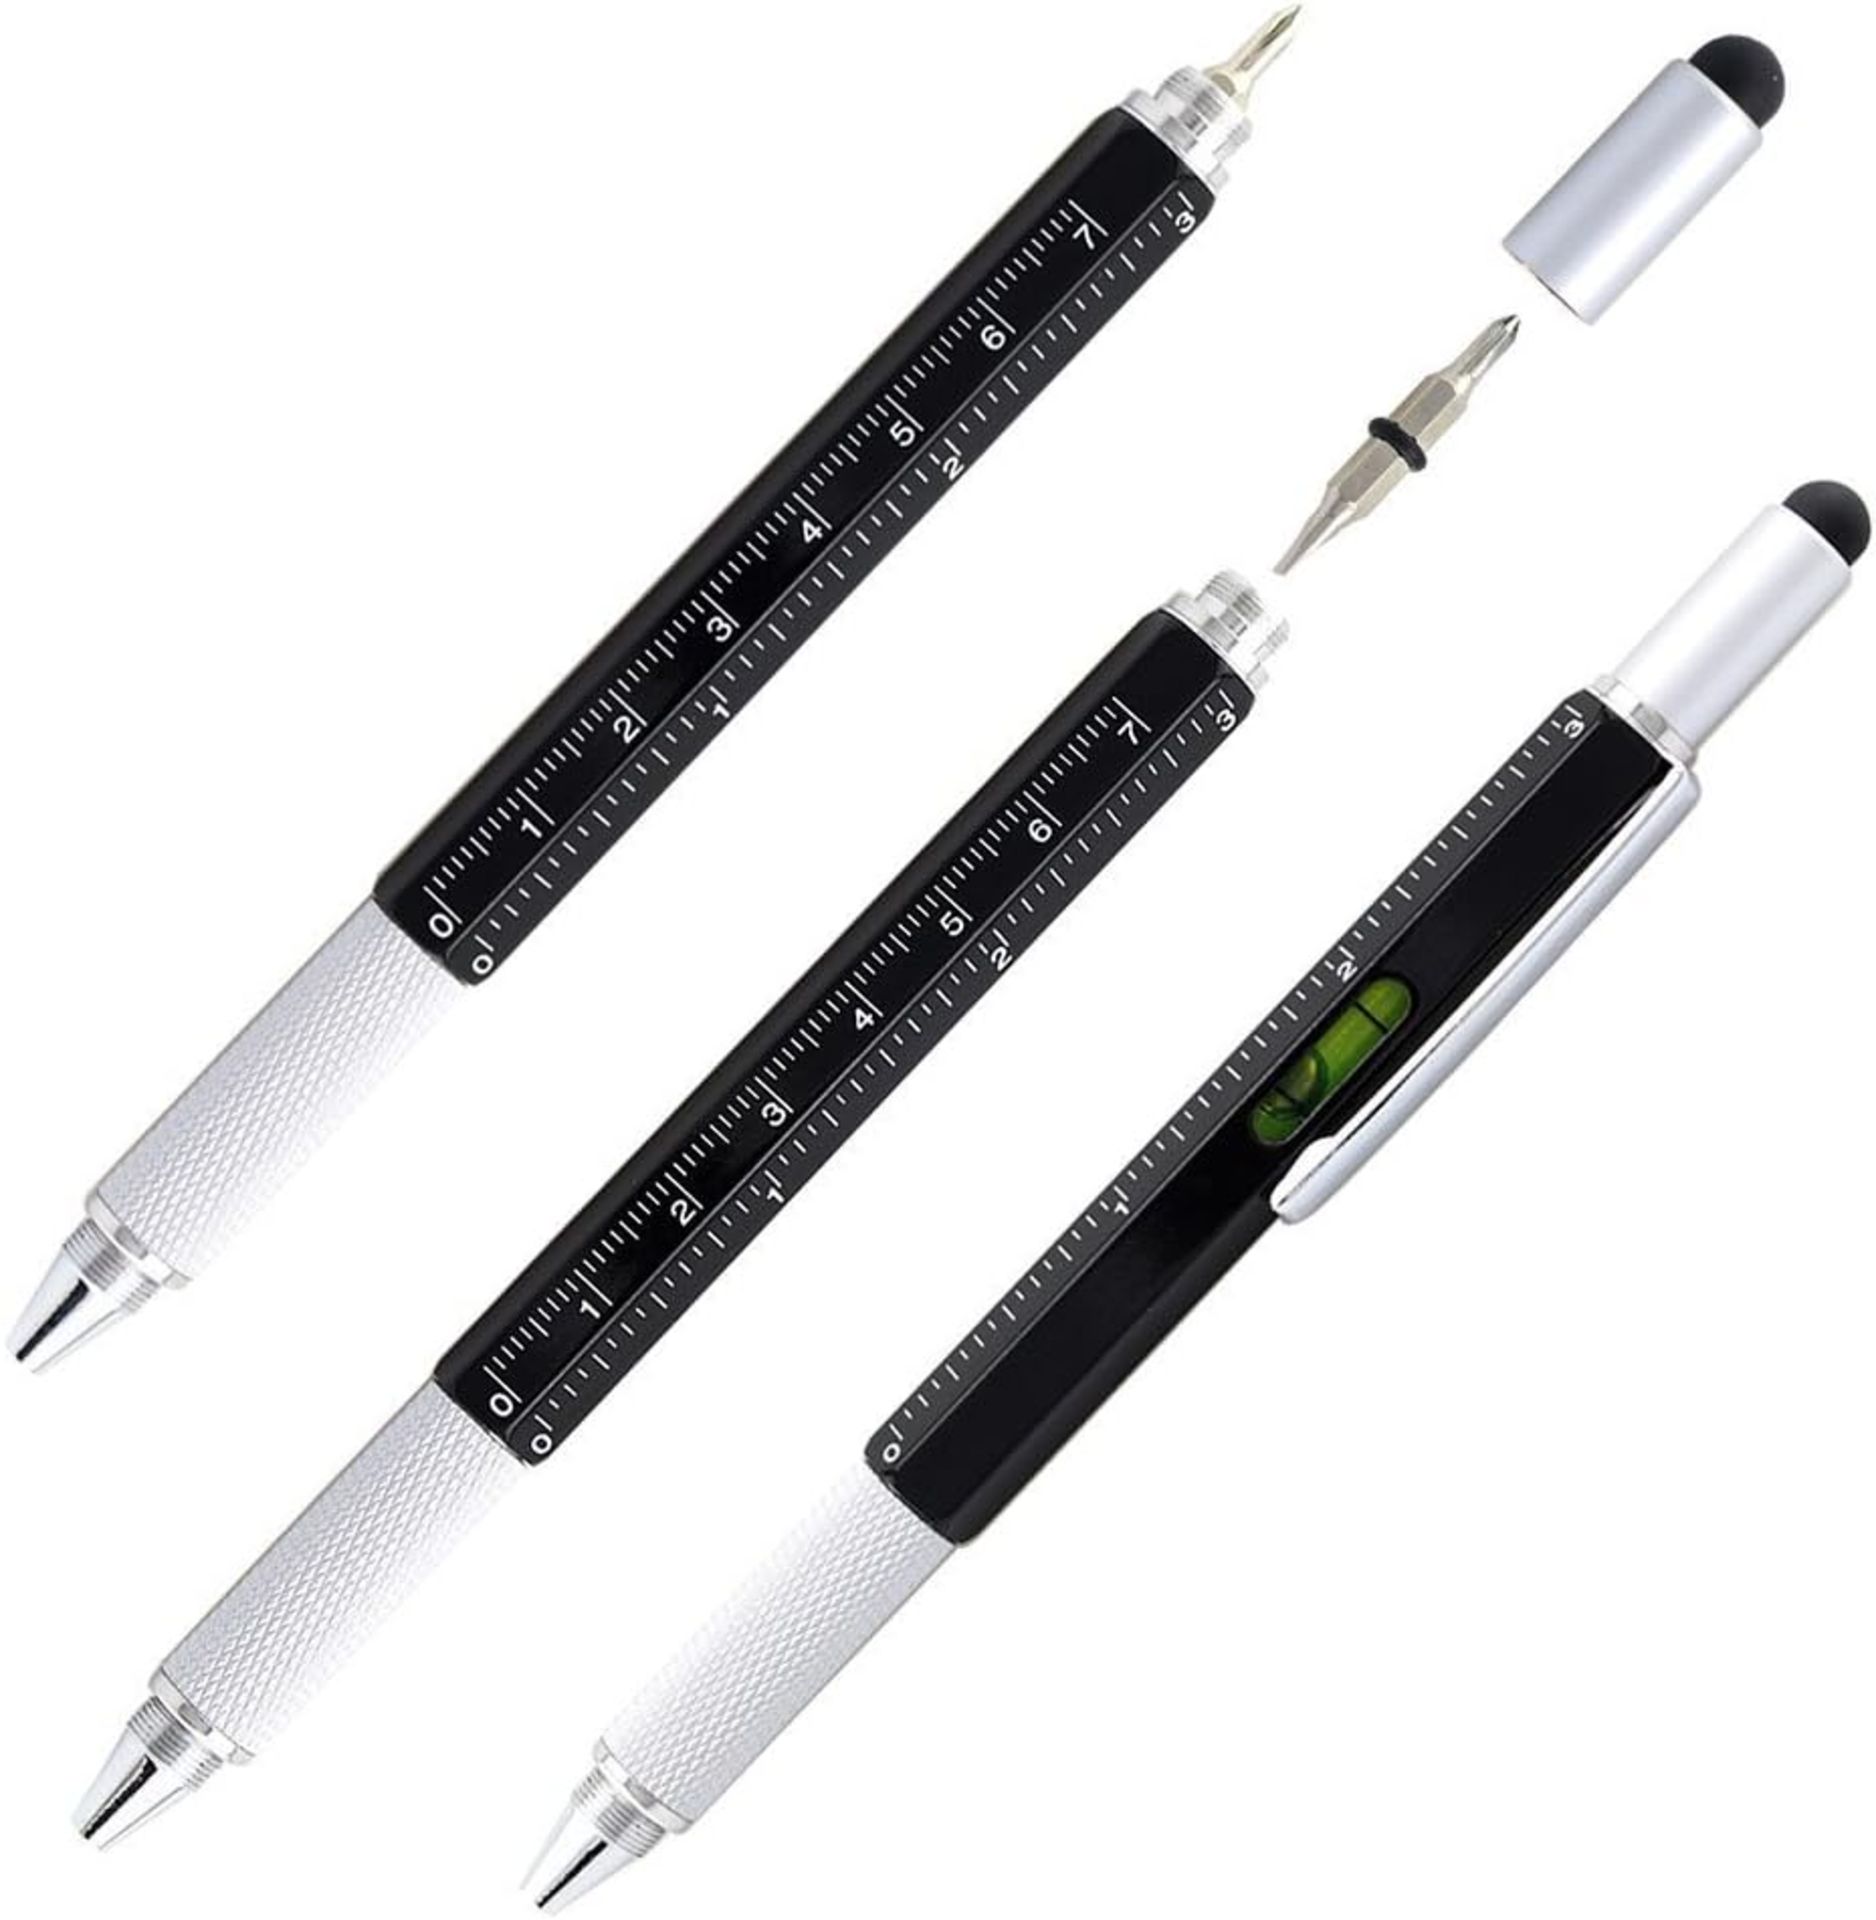 TRADE LOT TO CONTAIN 200x BRAND NEW 6 in 1 Tool Pen with Ruler, Level, Touch Screen Stylus, Phillips